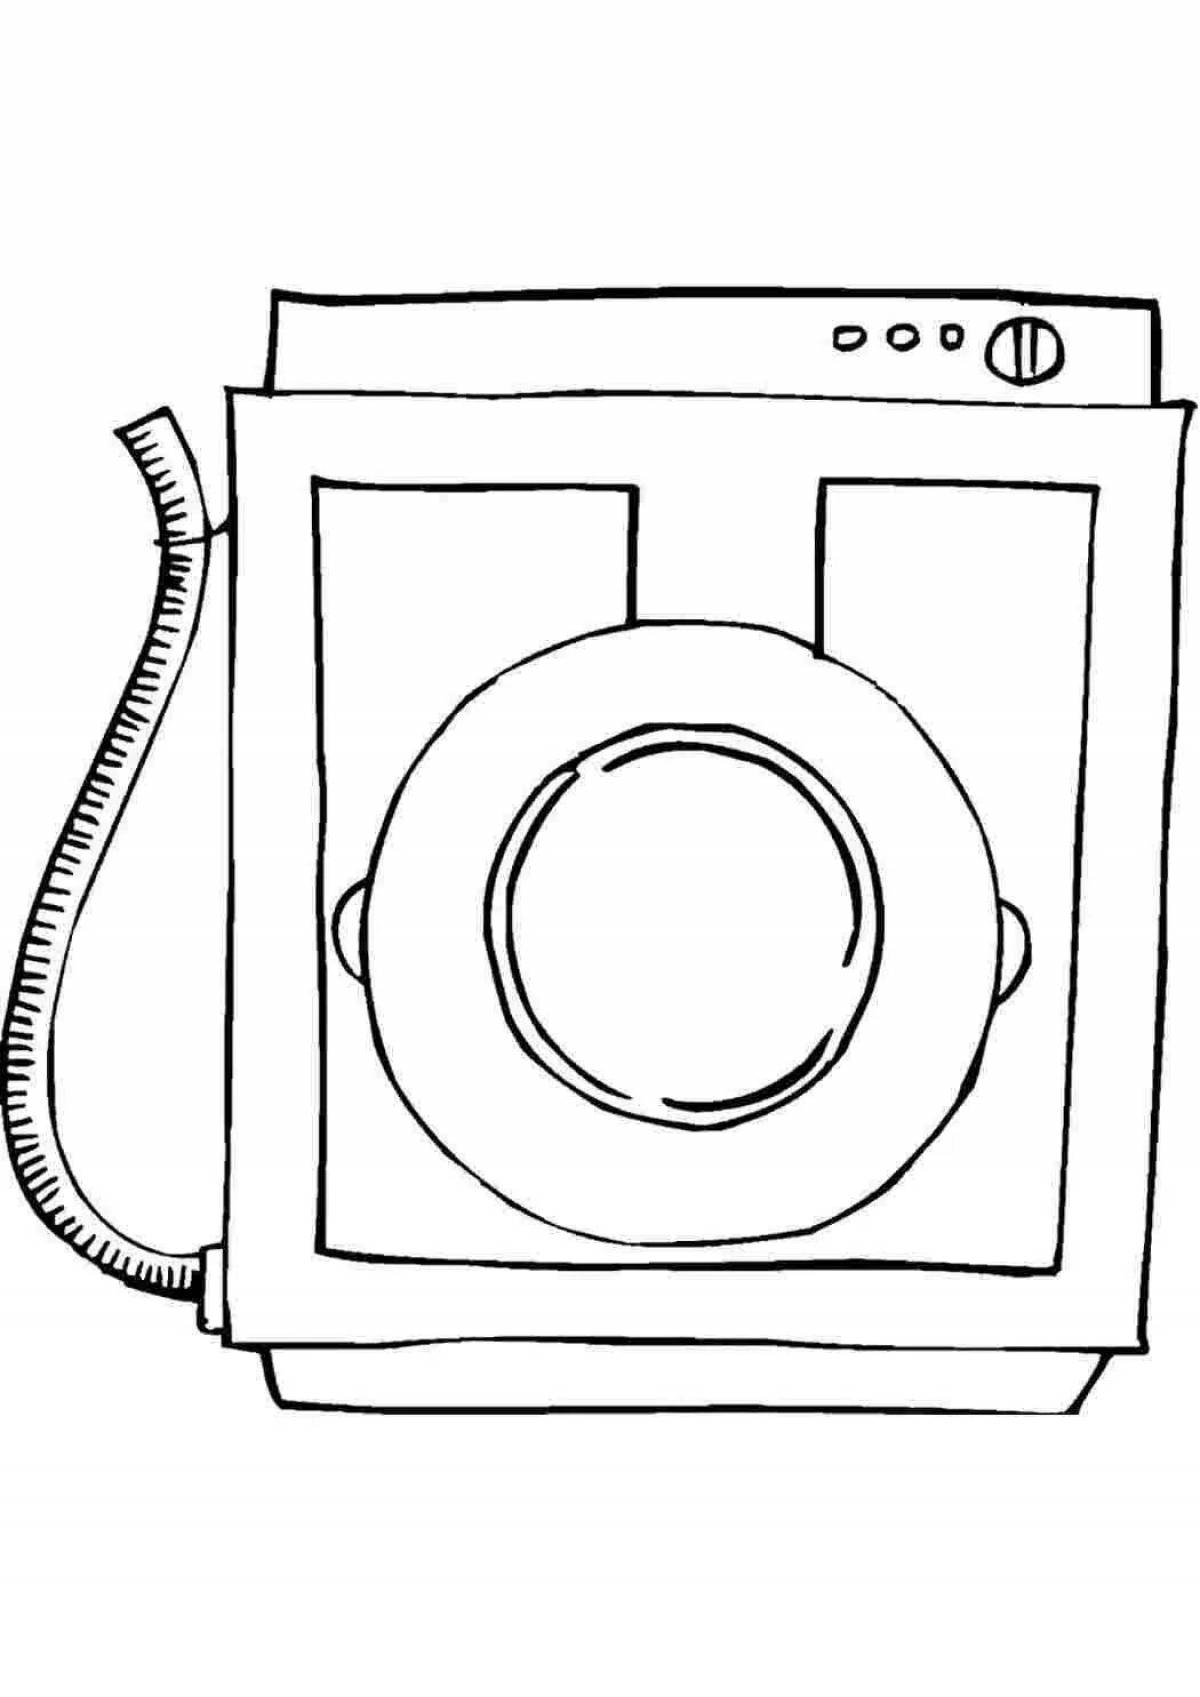 Coloring pages of household appliances for kindergarten